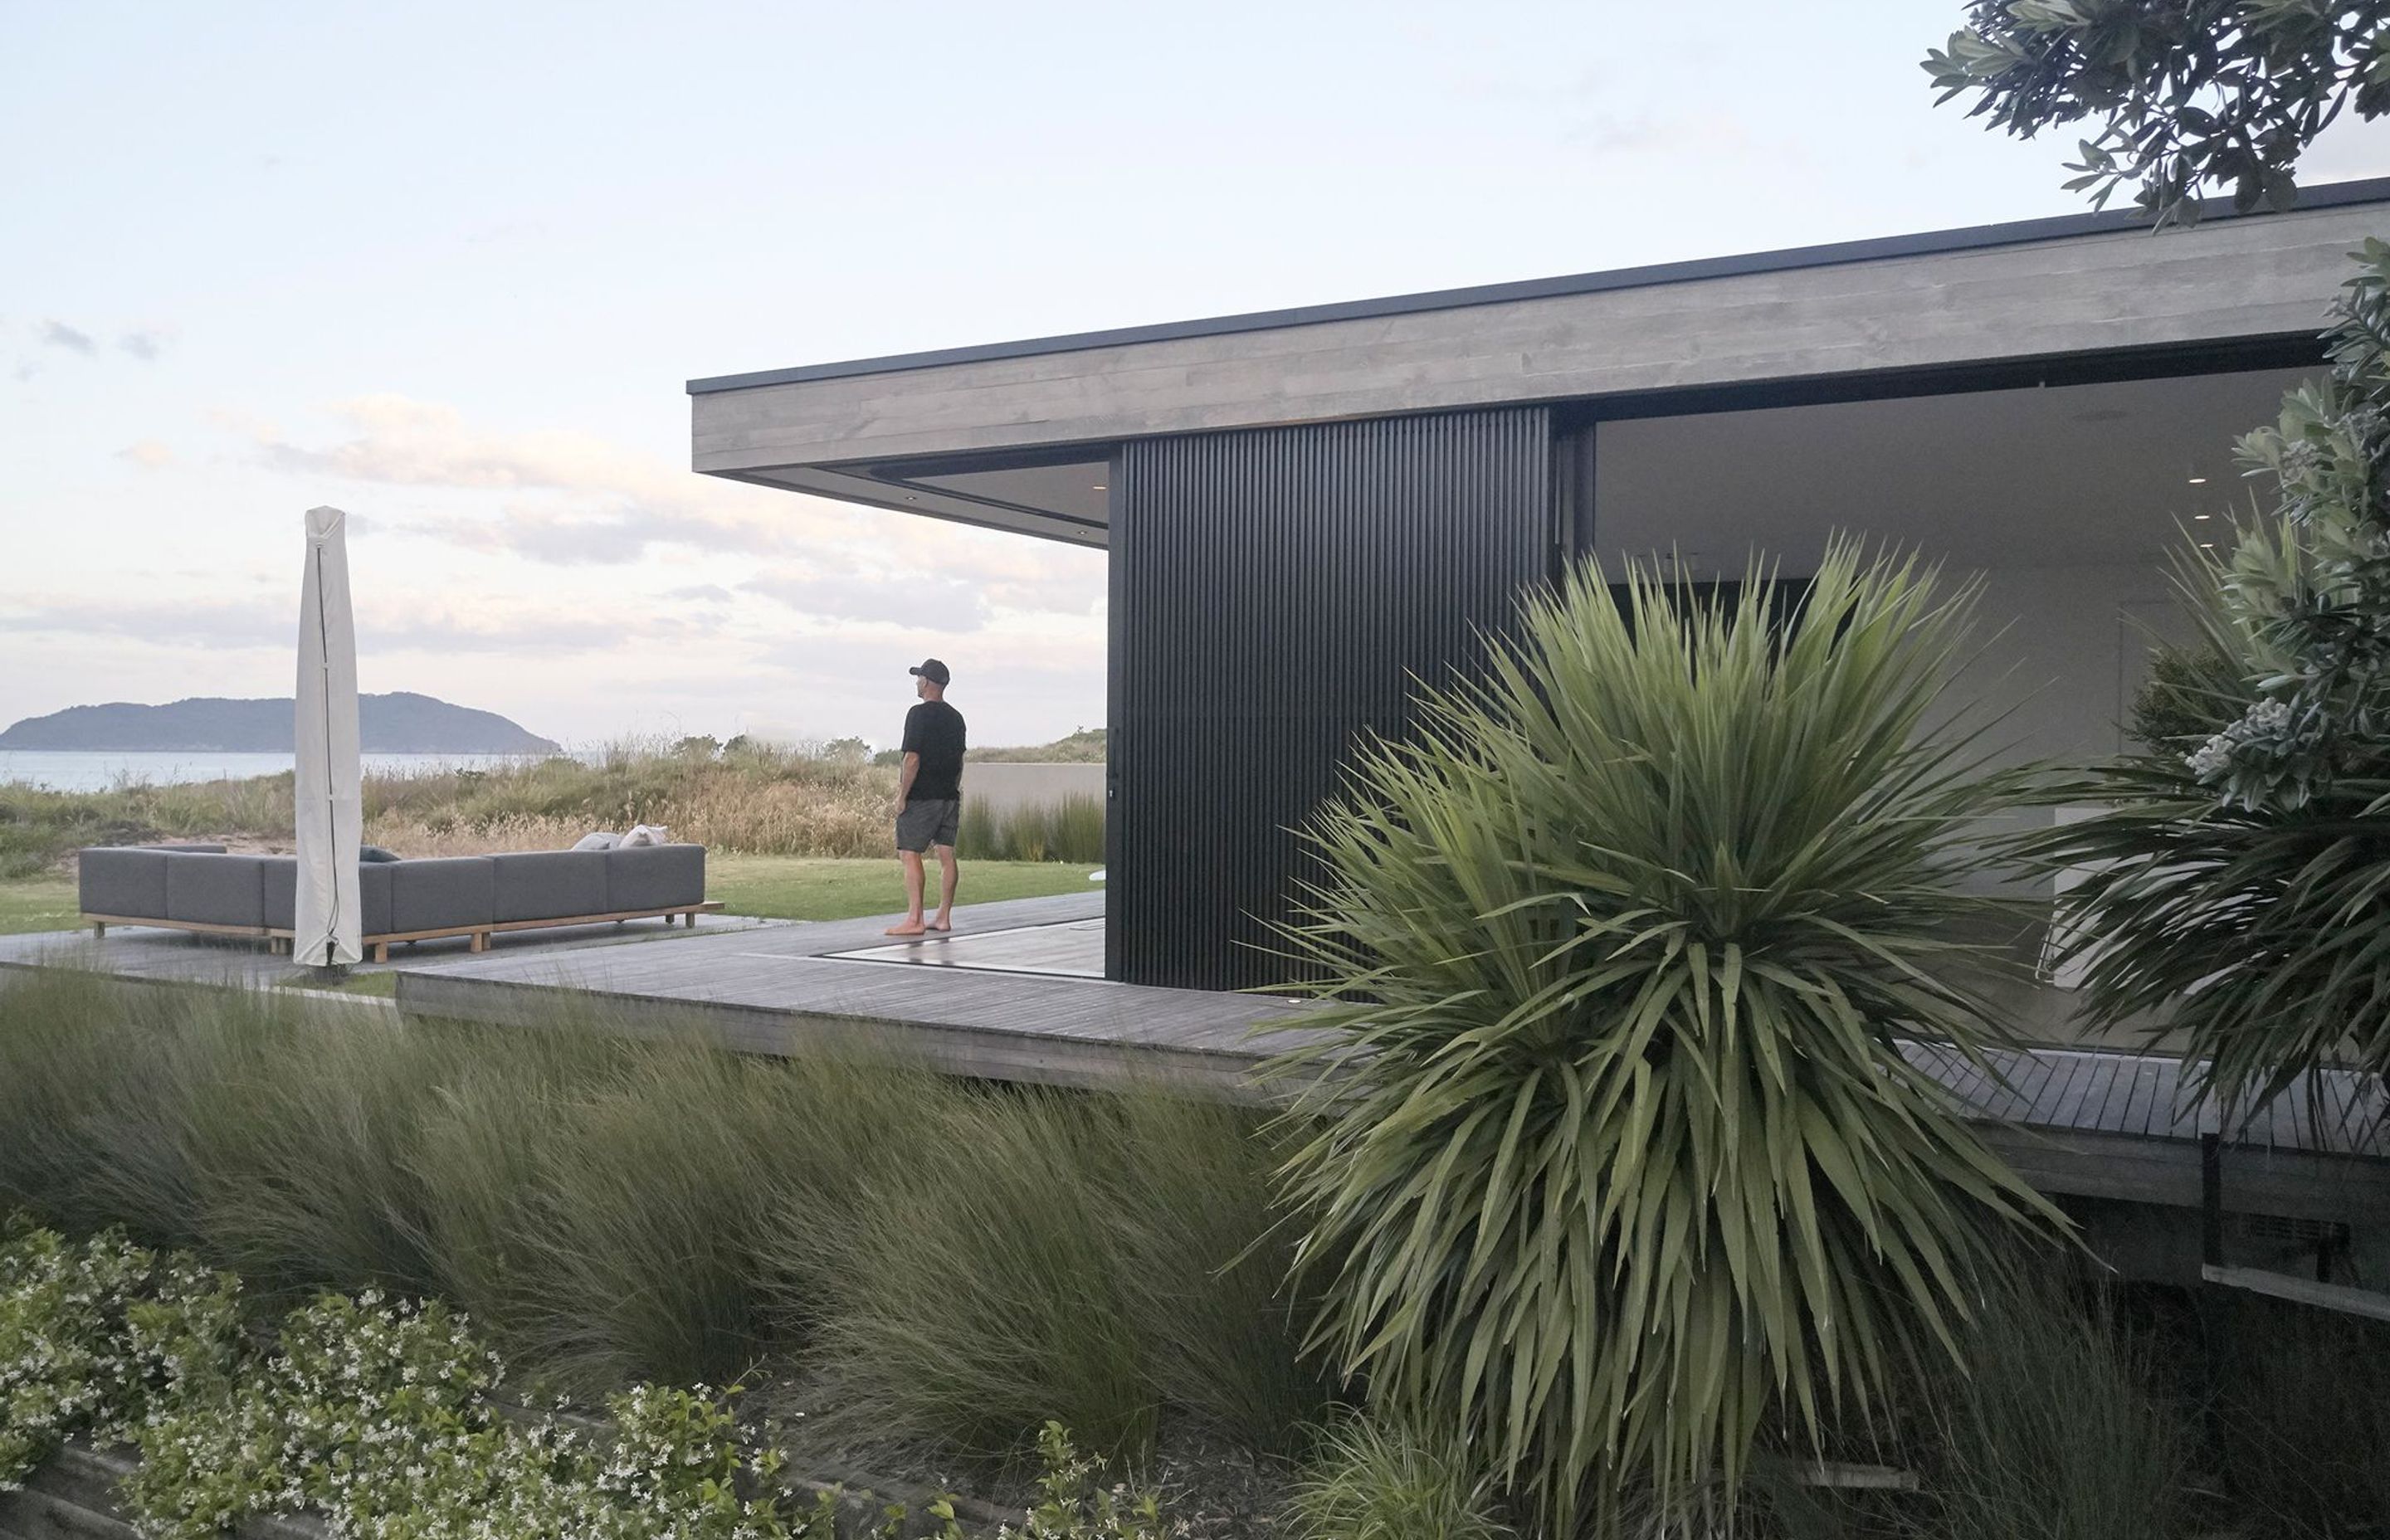 Adjacent to the dining area, a floating deck disconnected from the house sits in the grass, close enough to the dunes that the feeling of being within them is inescapable.